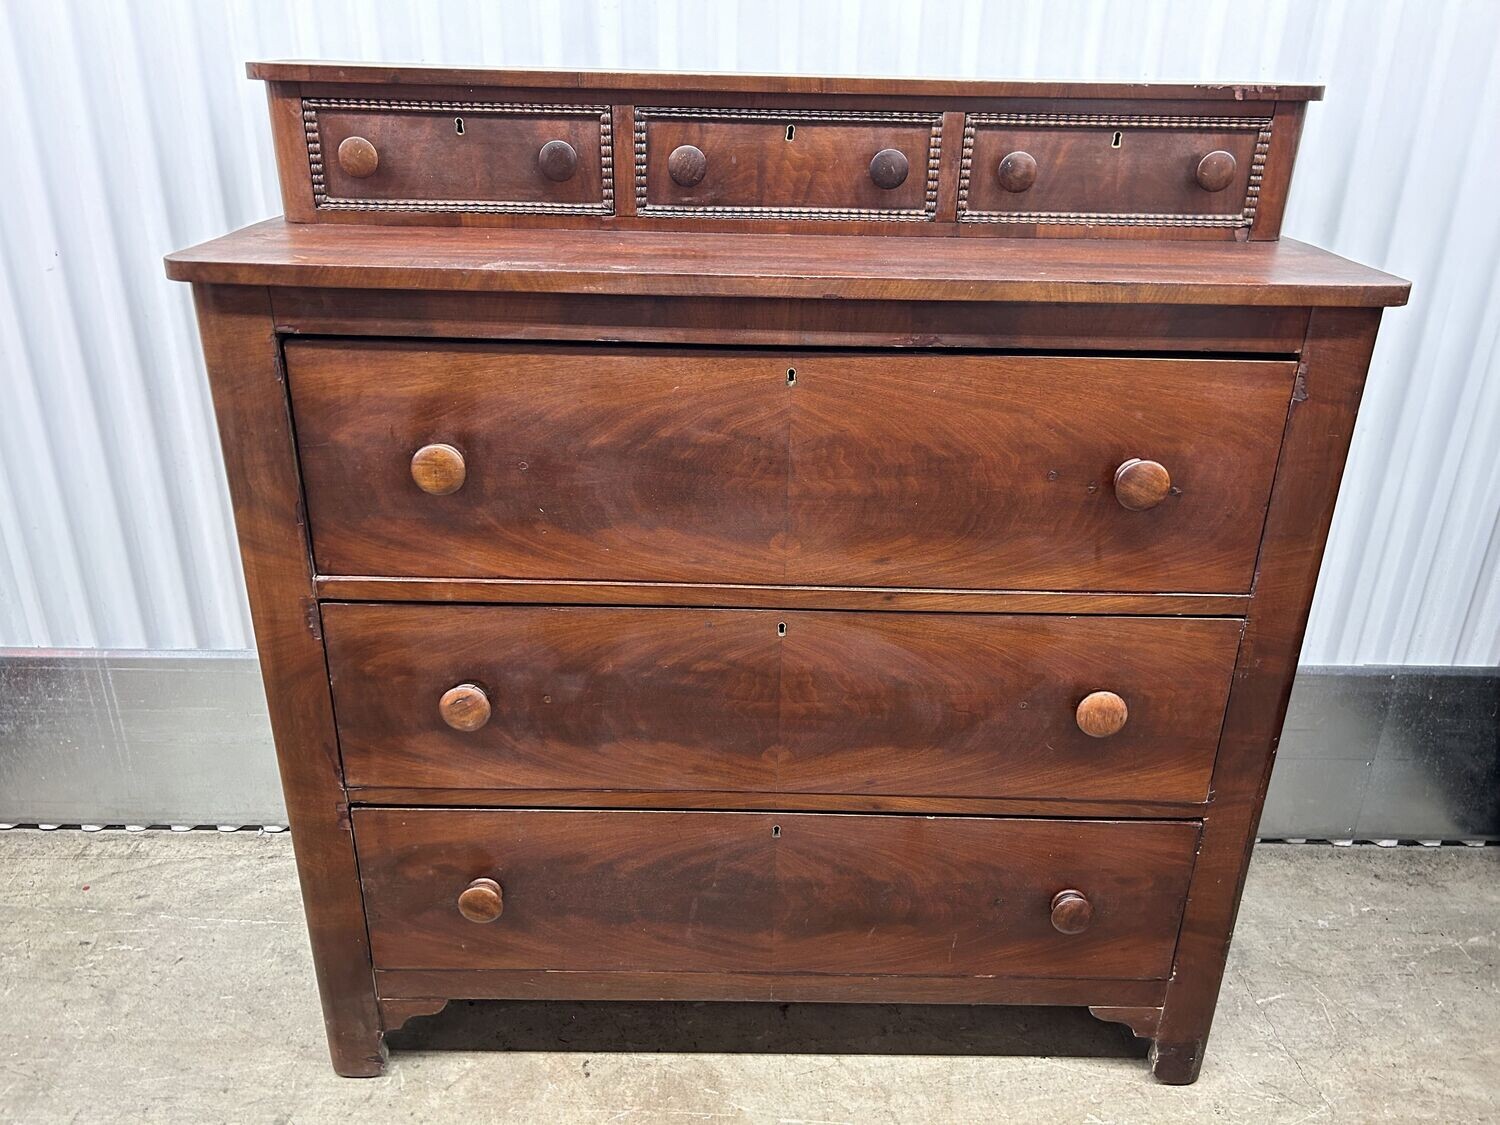 Antique 3-drawer Dresser with &quot;glove box drawers&quot; #2126 ** 6 wks. to sell, full price